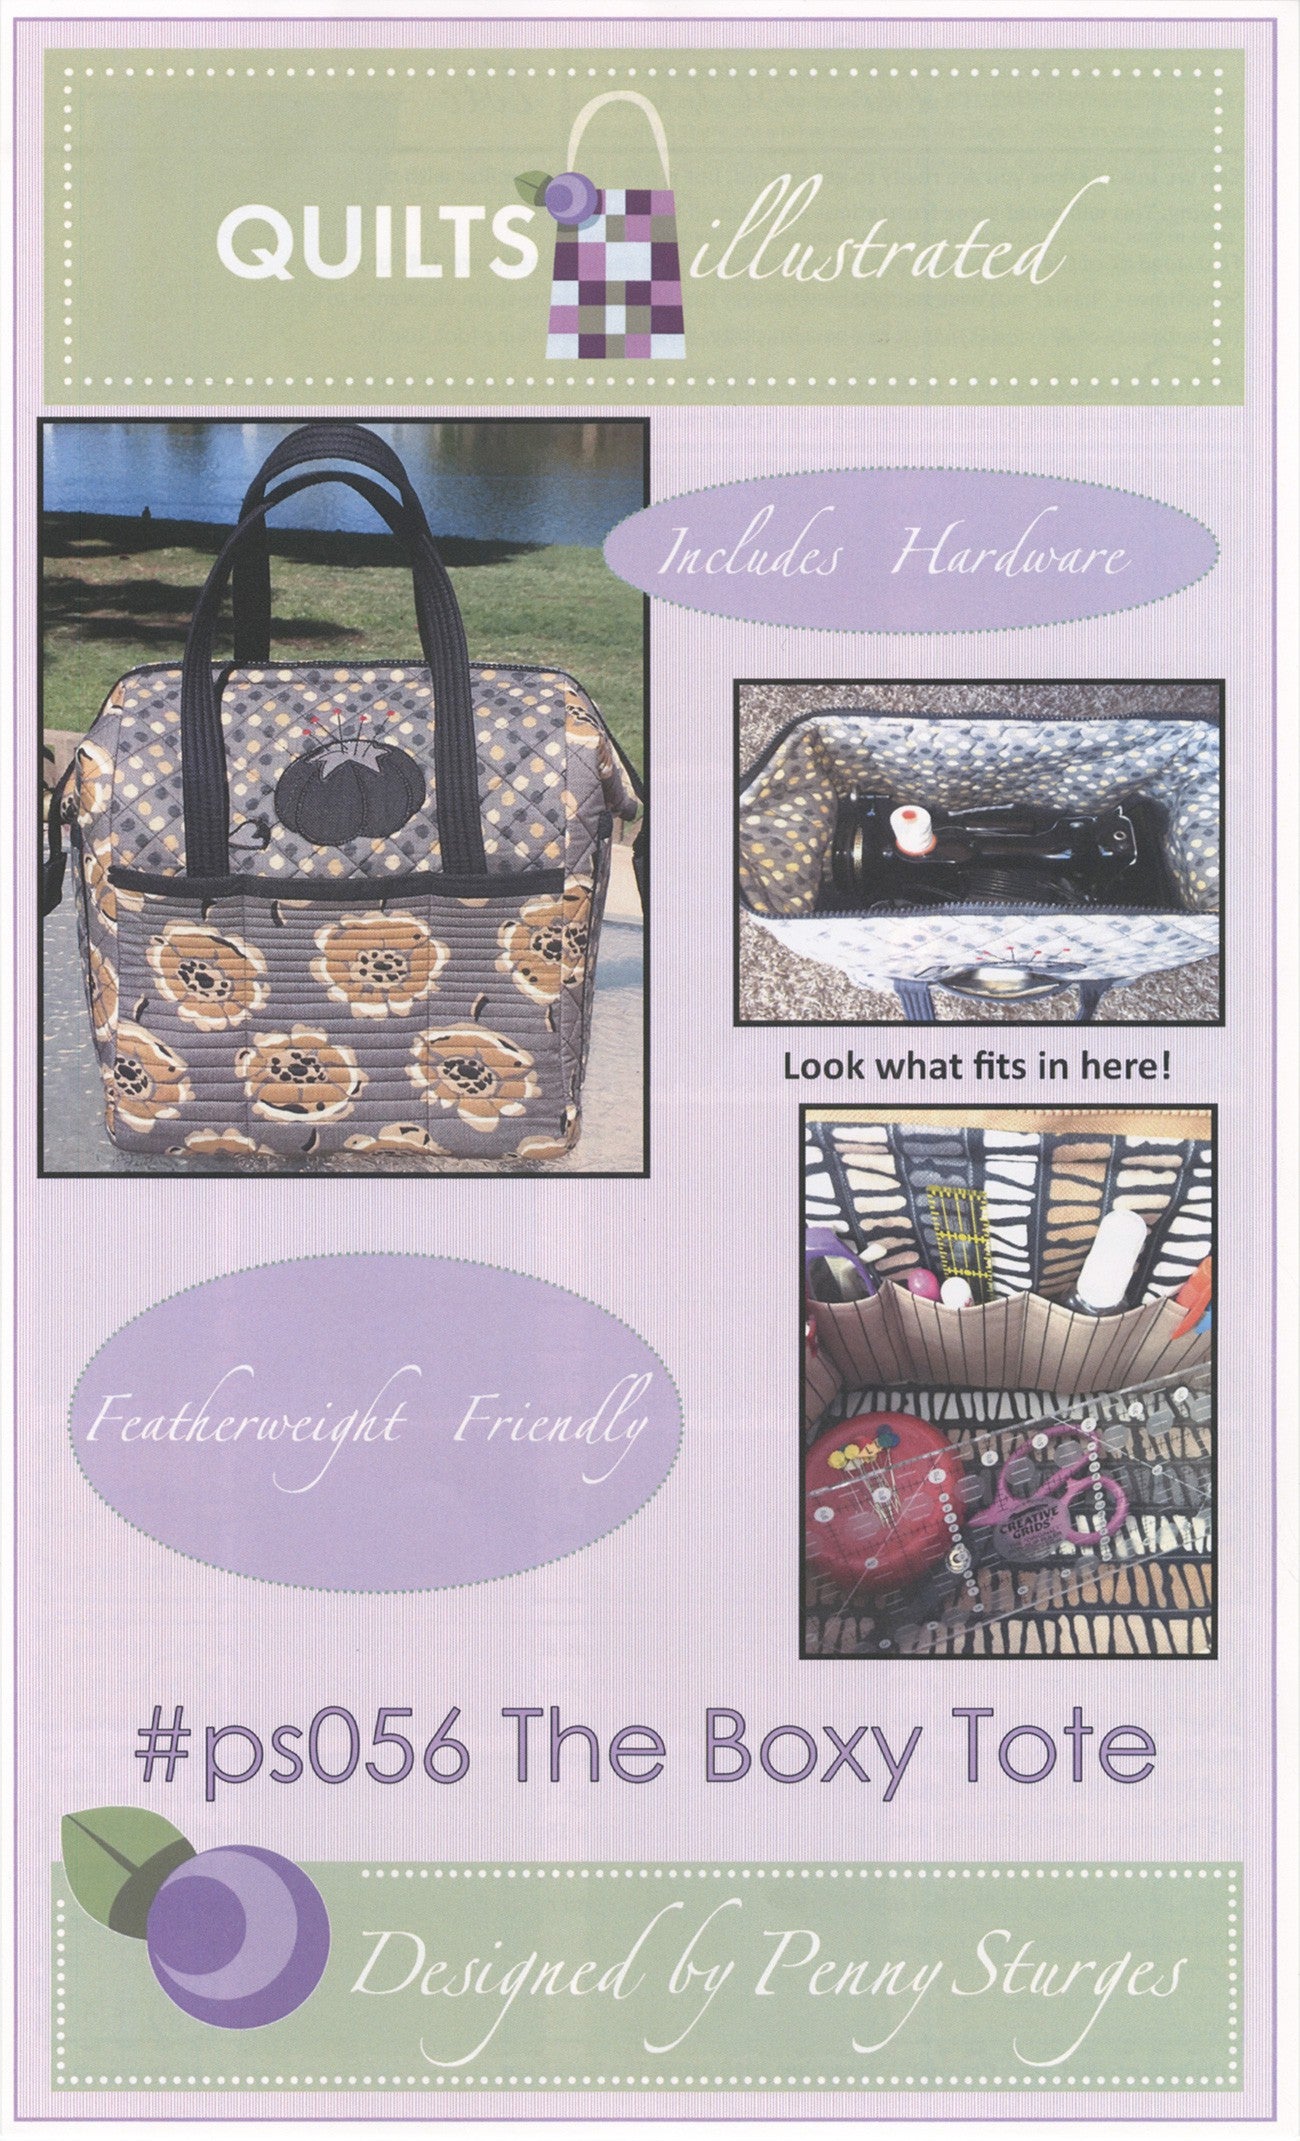 Boxy Tote Sewing Pattern and 2 Metal Stays by Peggy Sturges for Quiltsillustrated